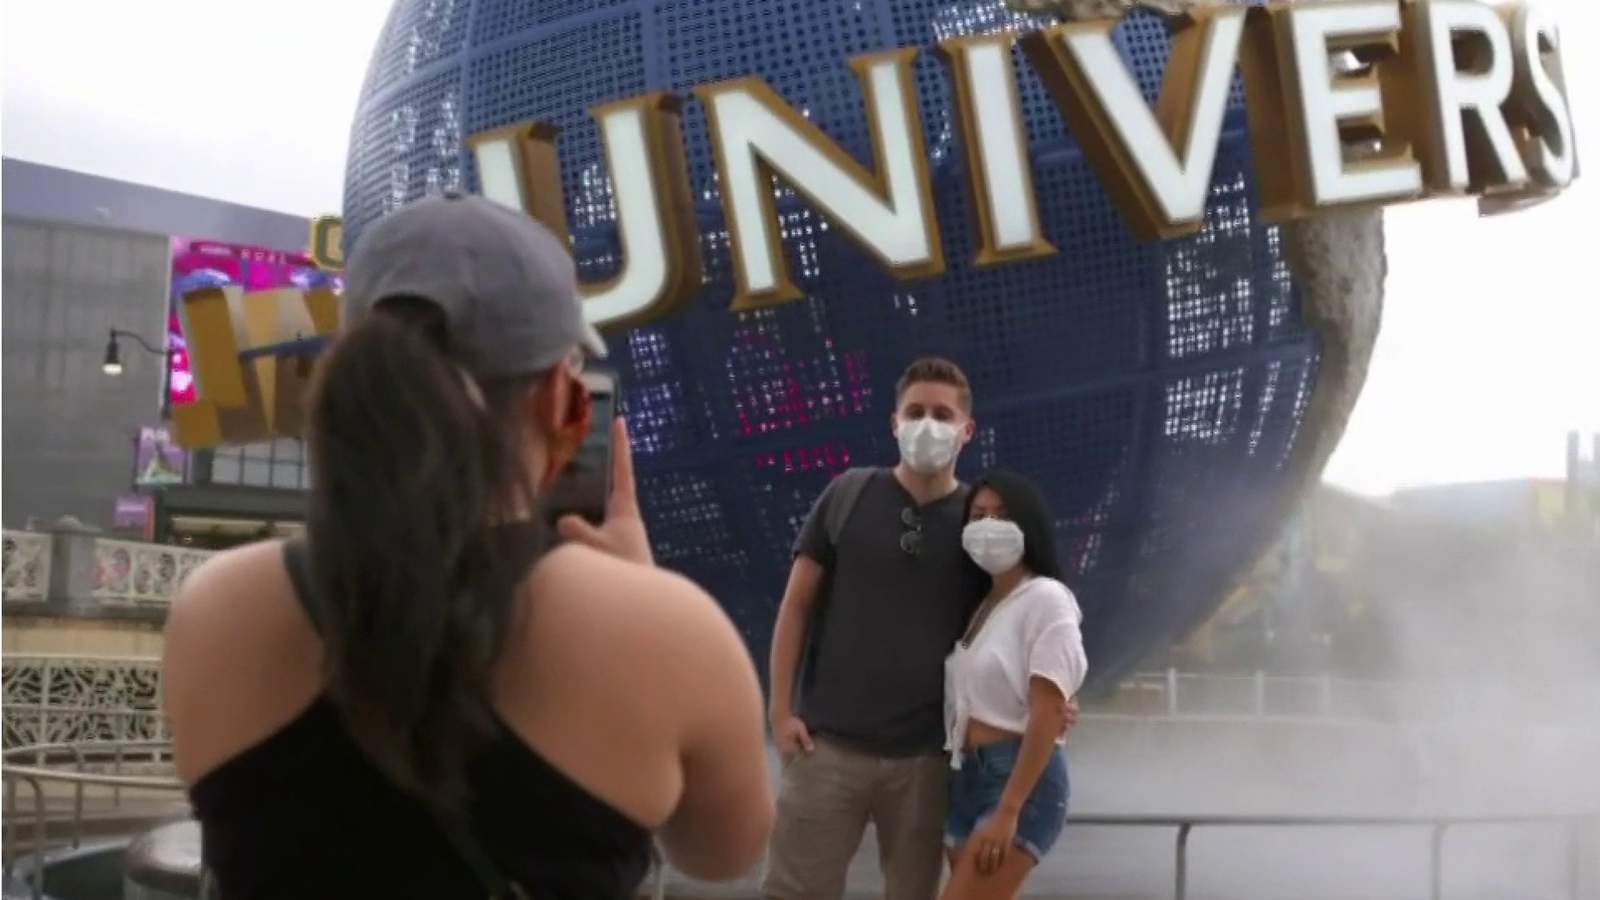 Universal Orlando changes mask policy